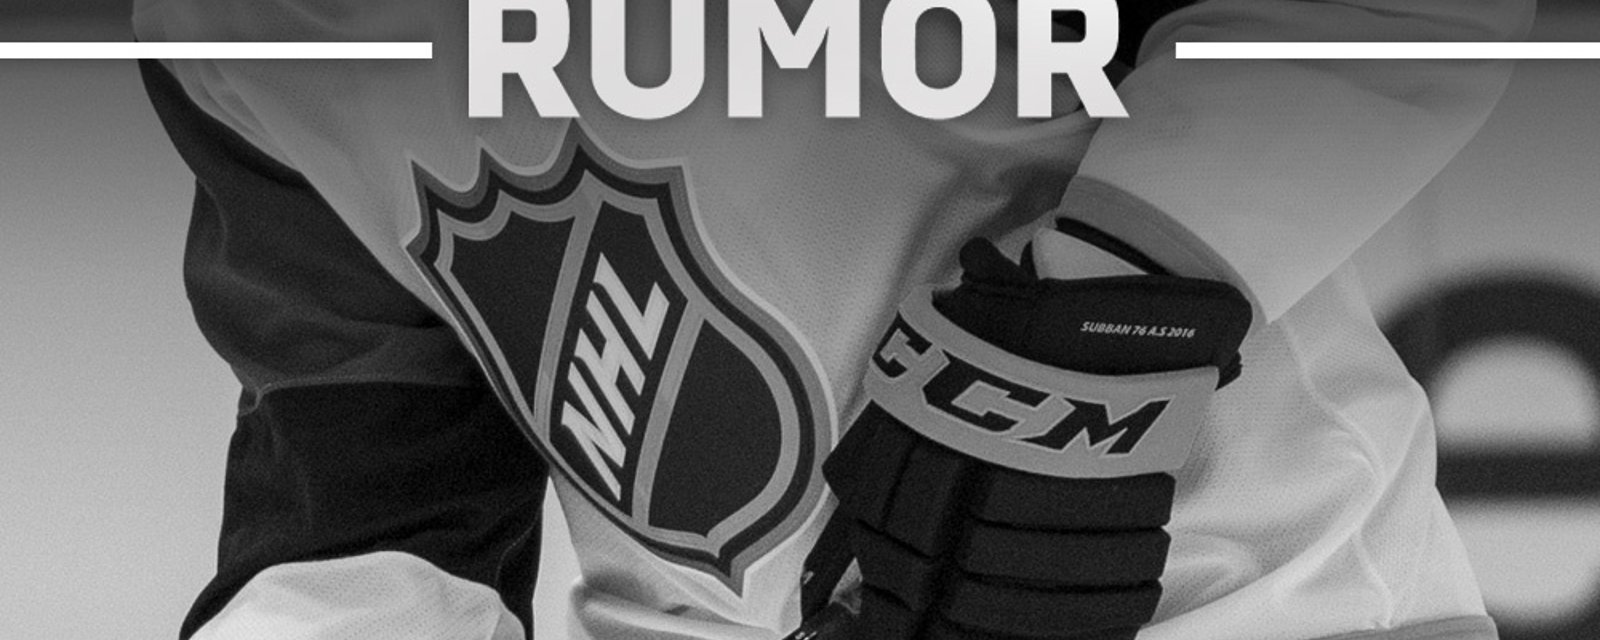 RUMOR: Unsigned RFA In Talks With Another Team